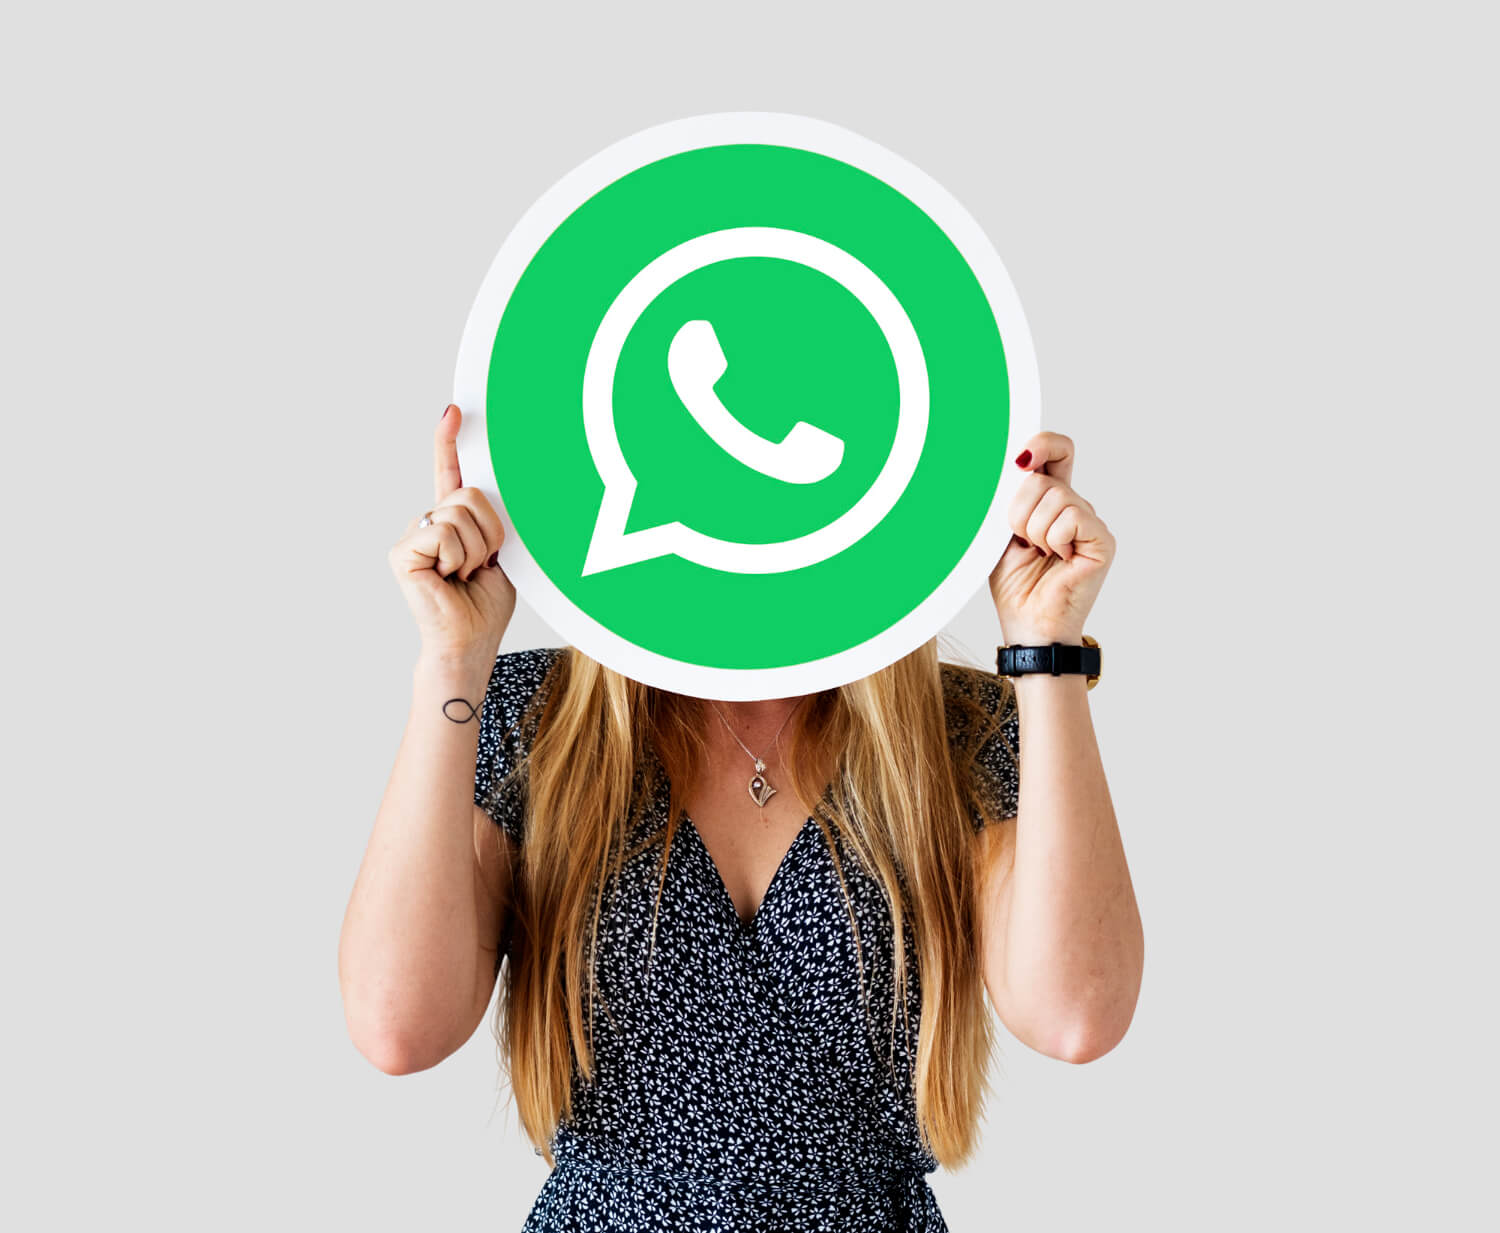 WhatsApp for Sales: How to Sell More with Shopping Features